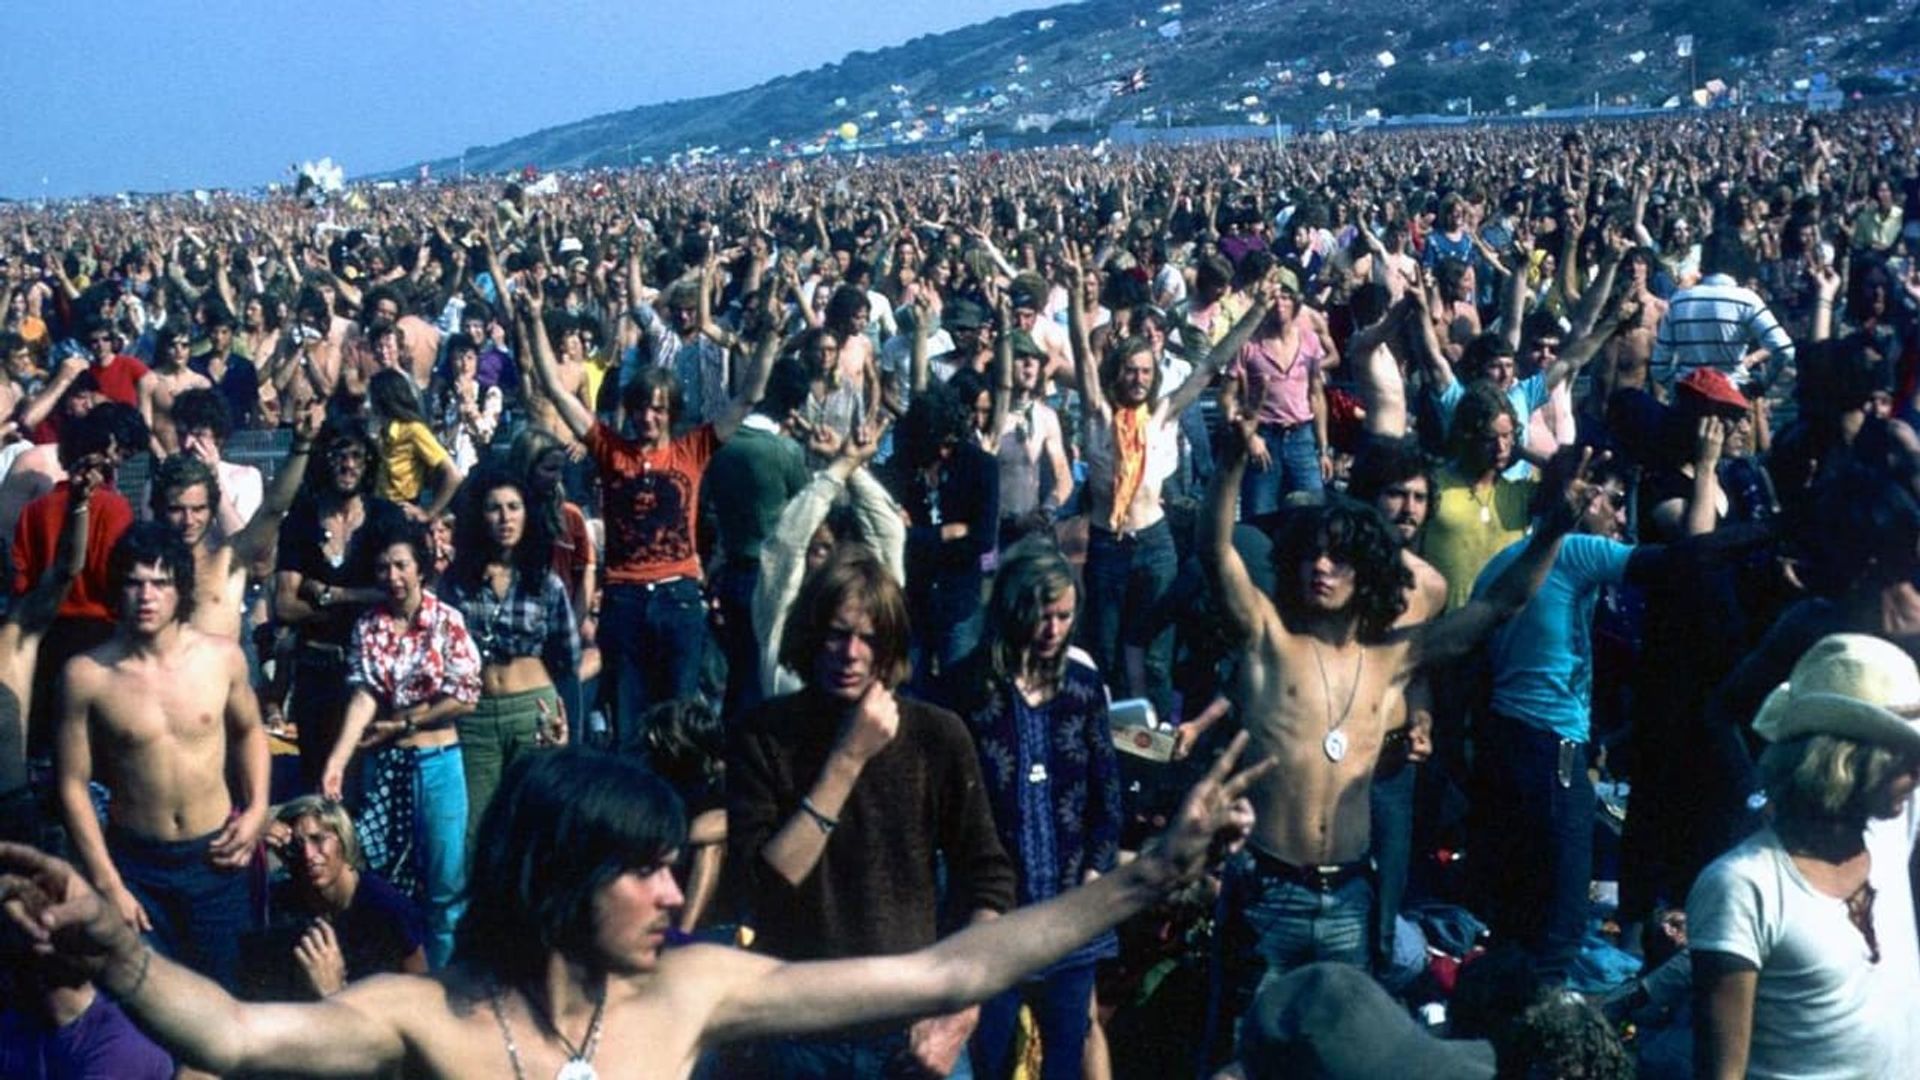 Message to Love: The Isle of Wight Festival background